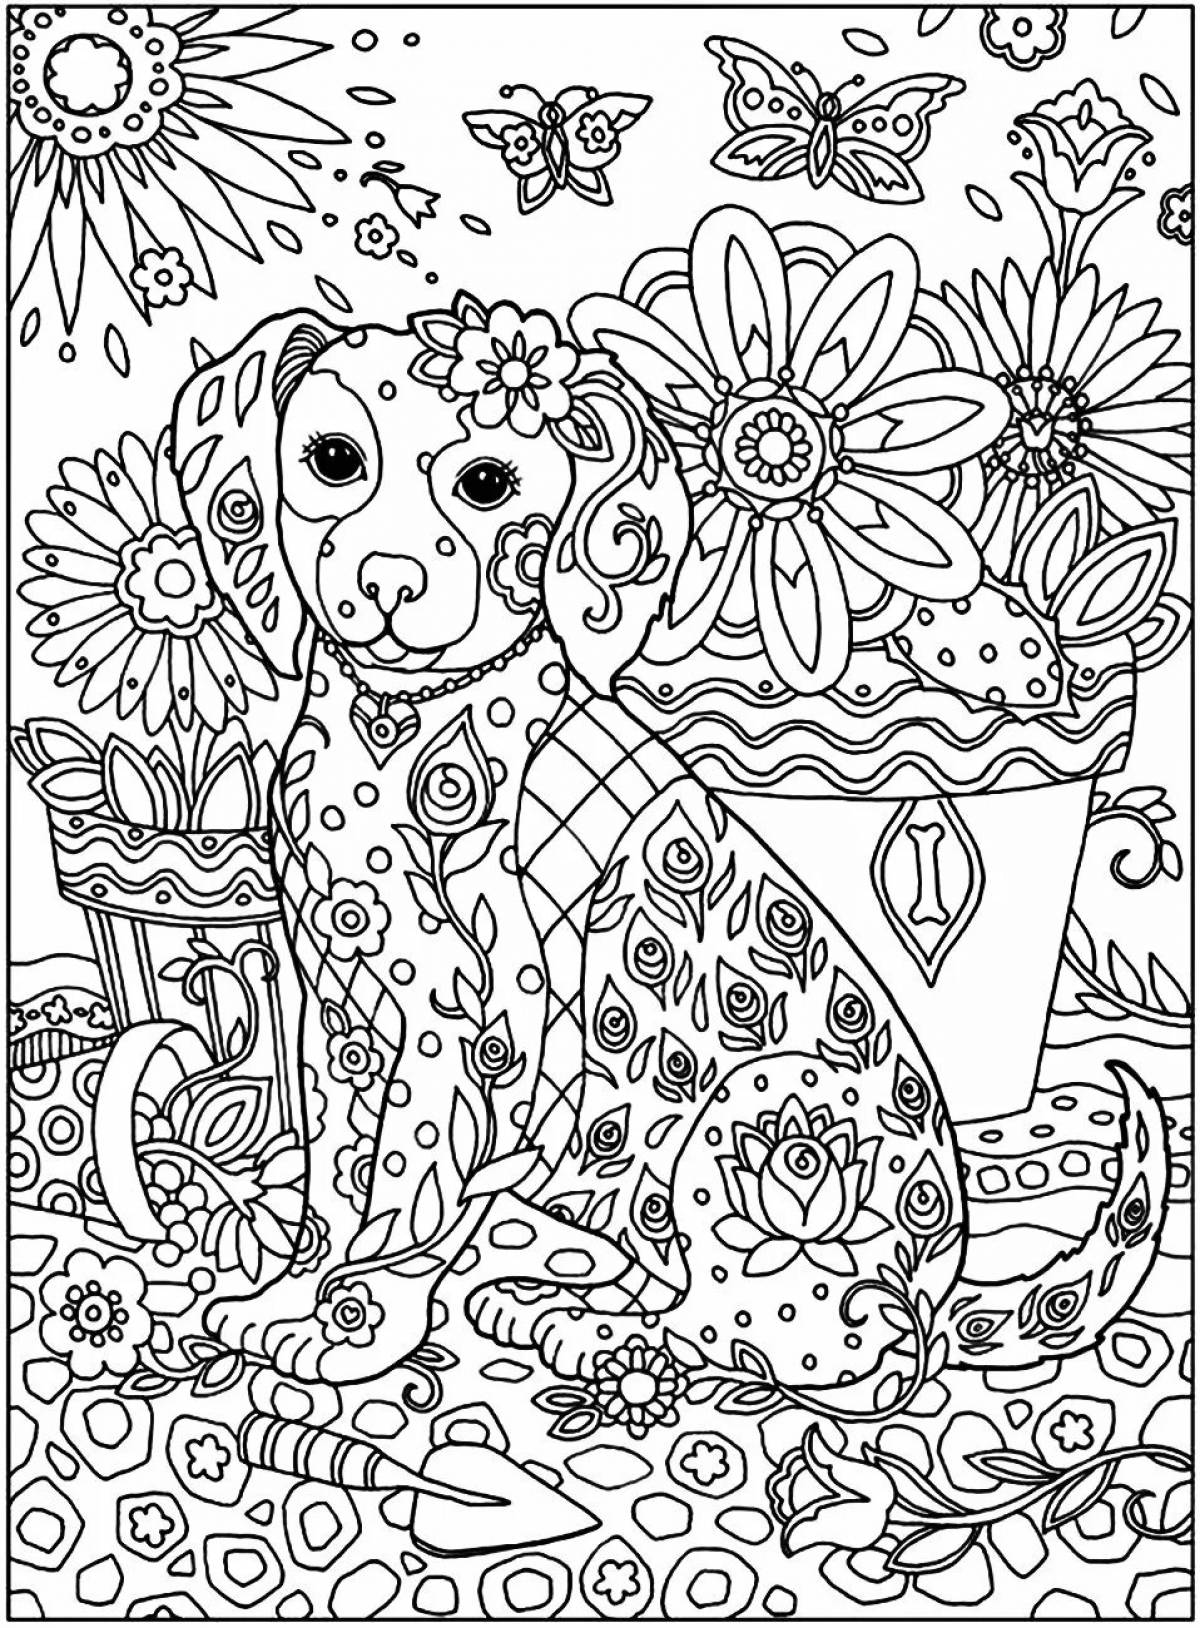 Animated antistress dog coloring book